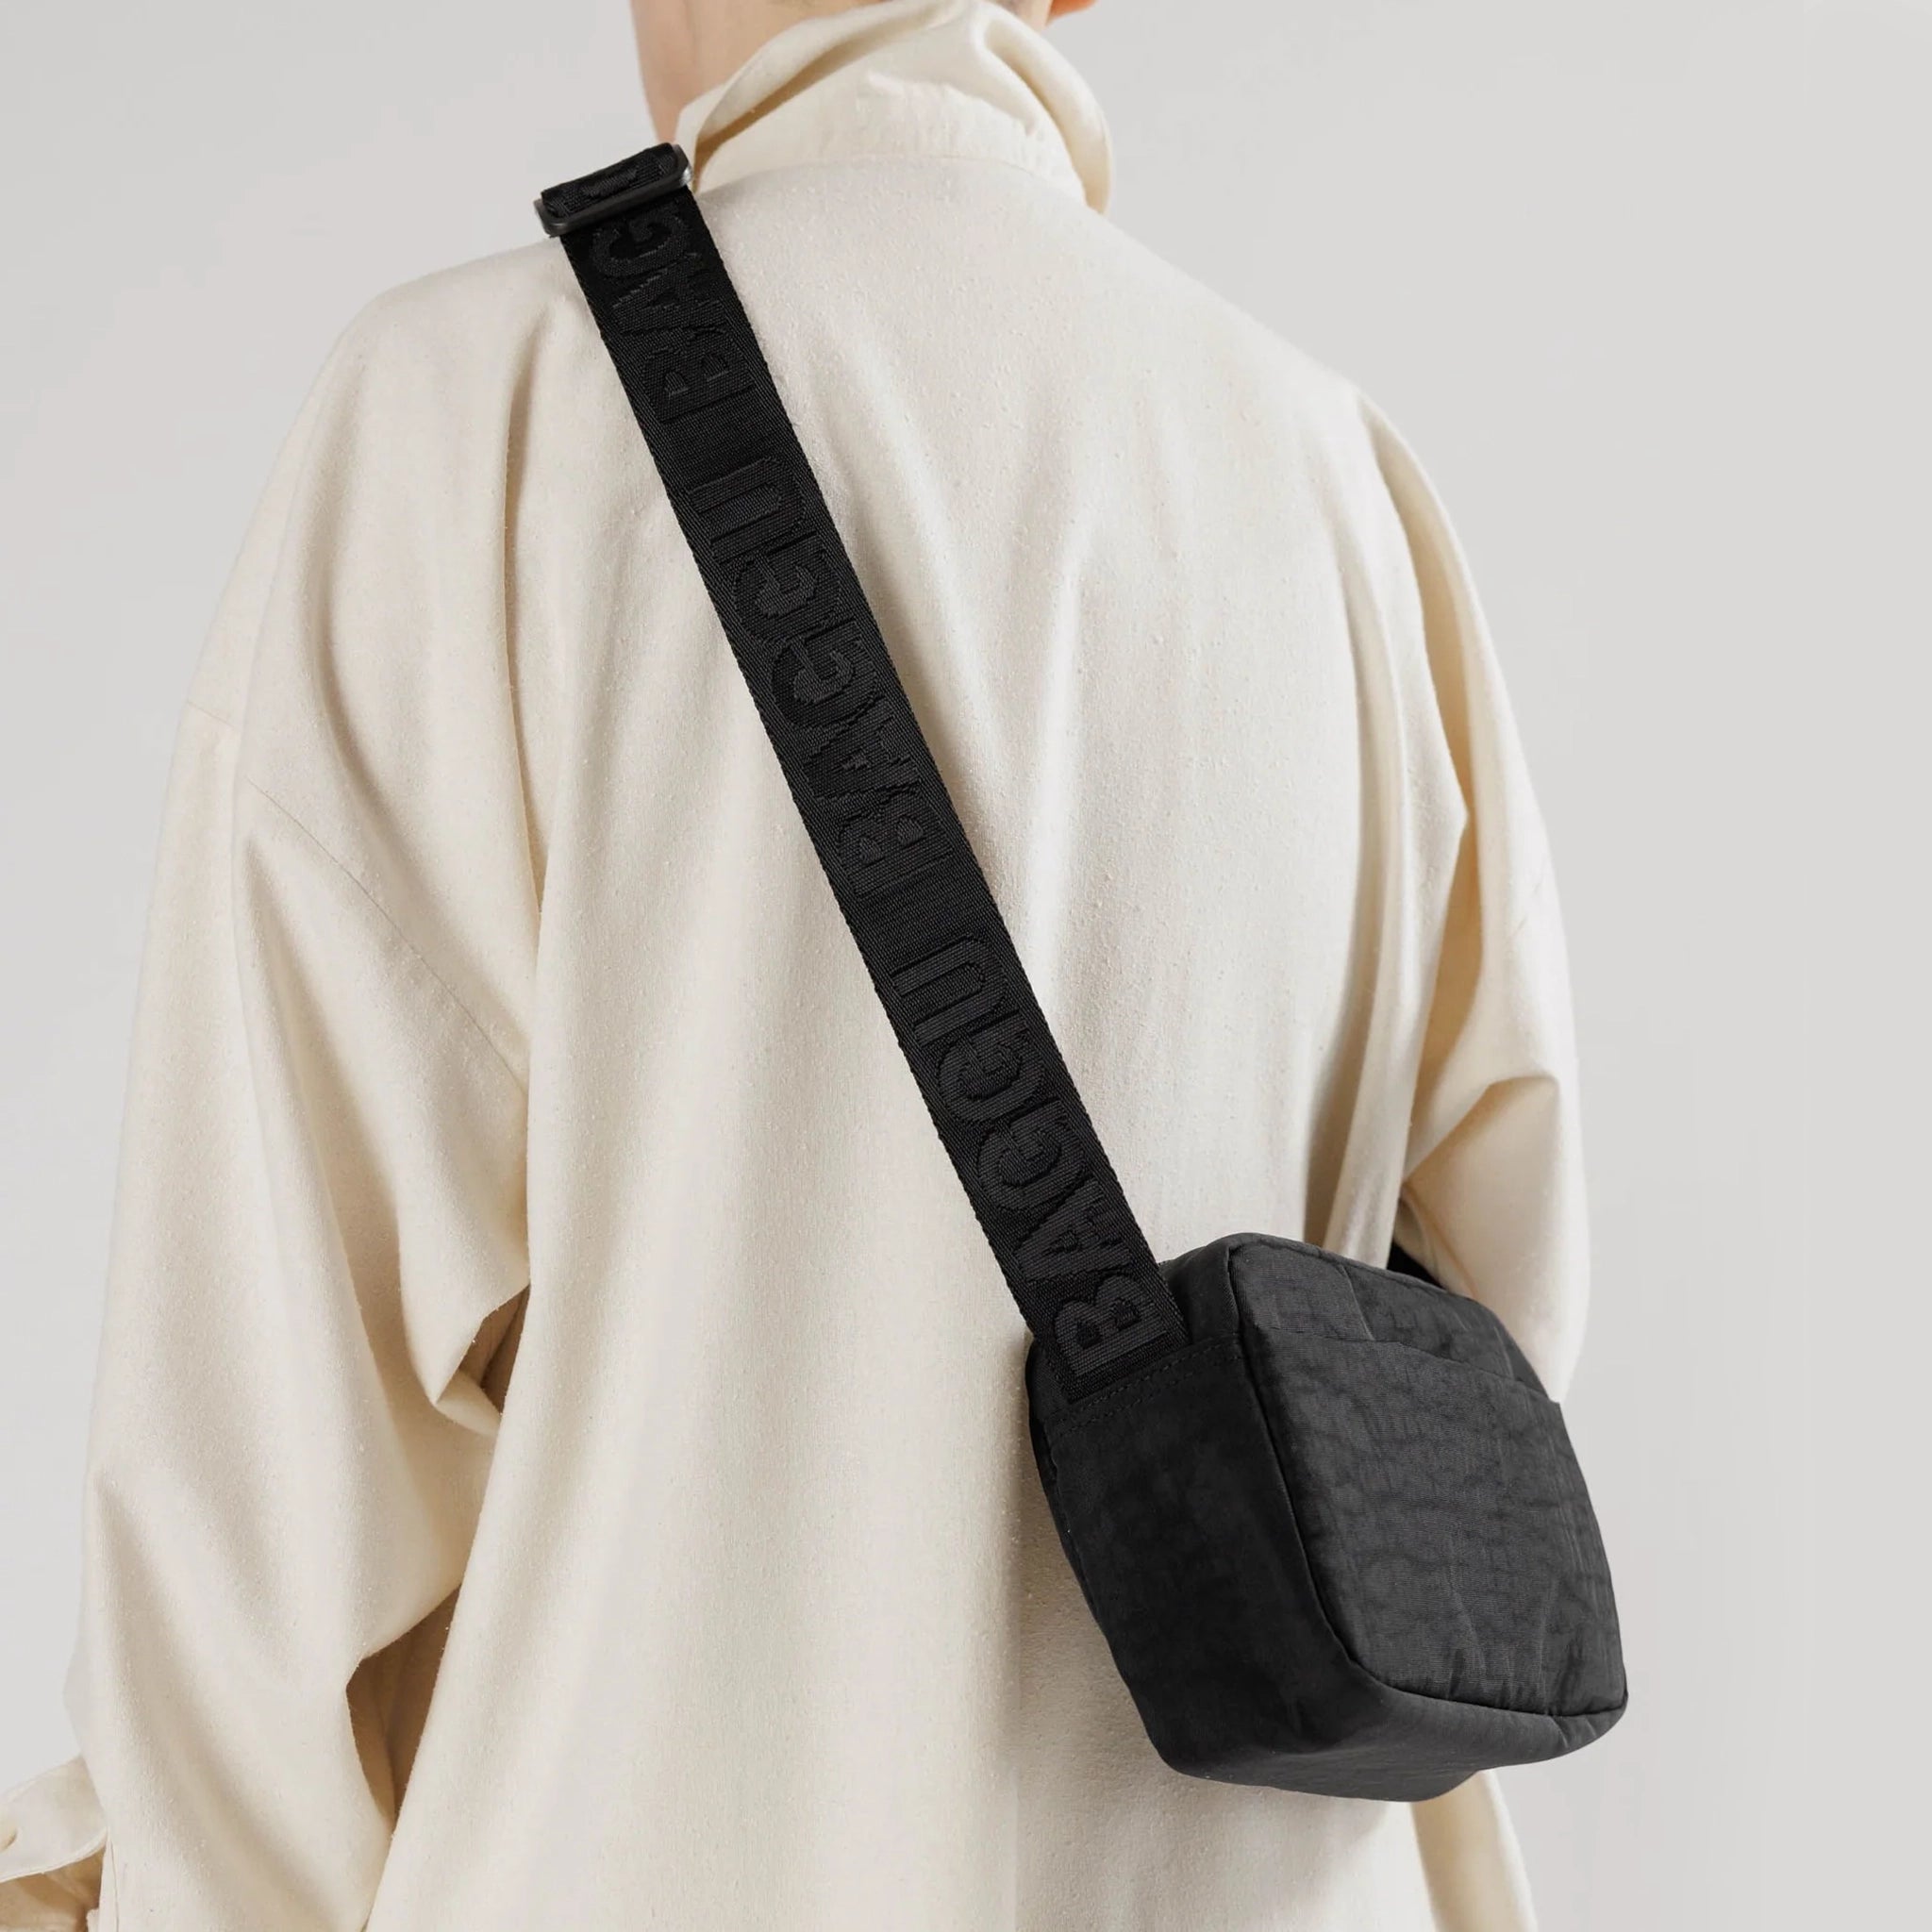 On a light grey background is a model wearing a black crossbody made of sturdy nylon material with a black adjustable strap that has "BAGGU" stitched into it in a shinier black material. 